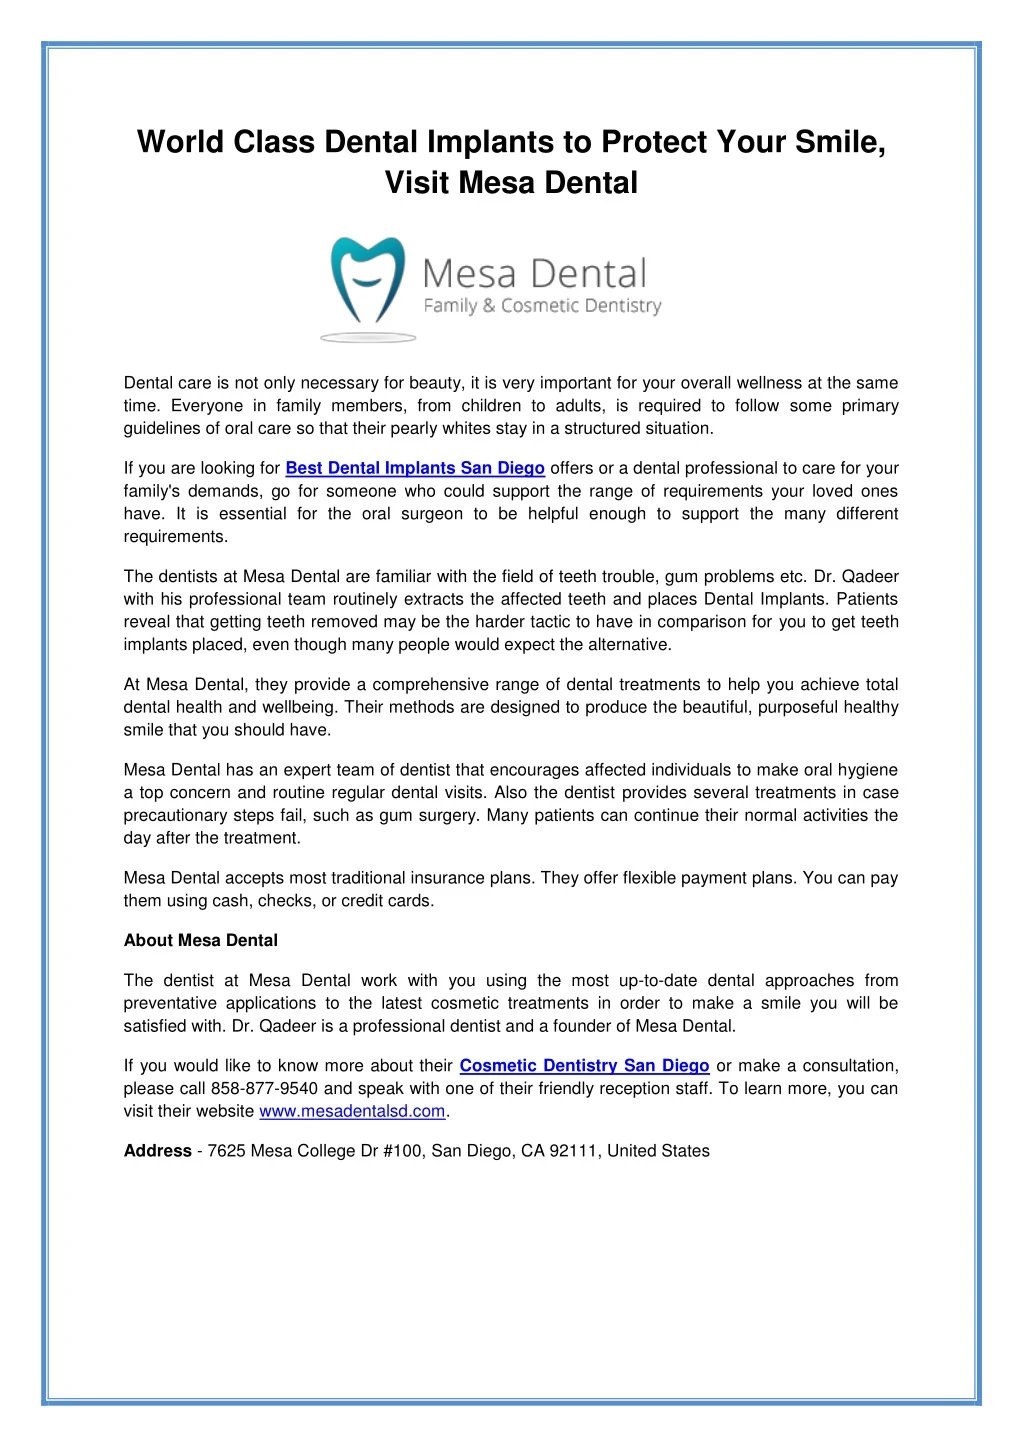 world class dental implants to protect your smile